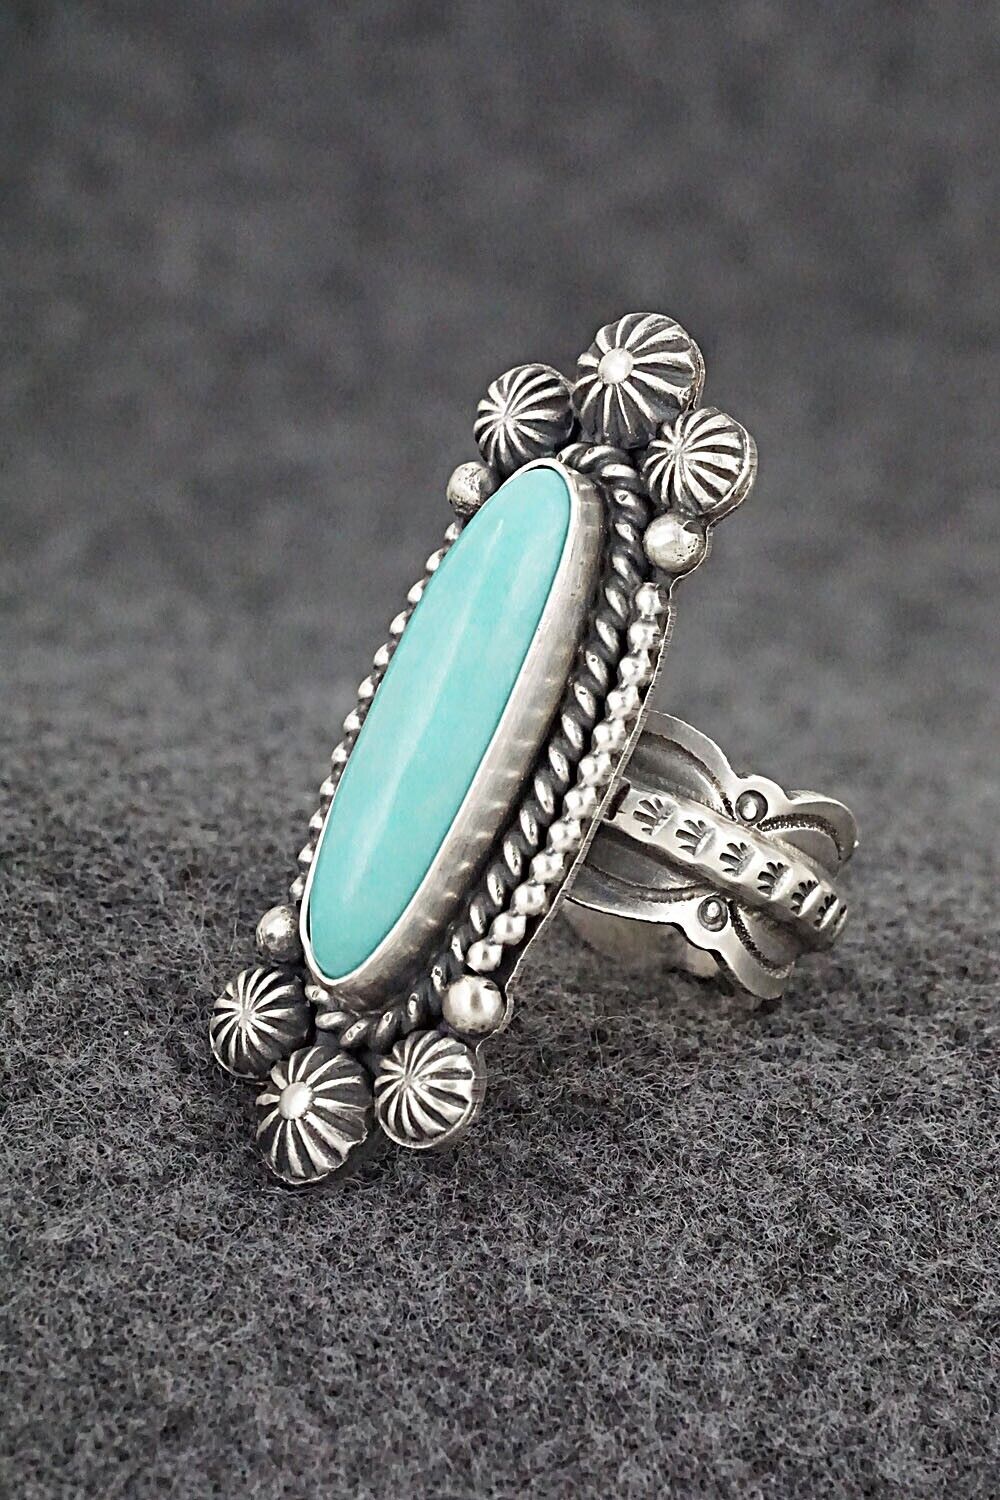 Turquoise & Sterling Silver Ring - Michael Calladitto - Size 8.5